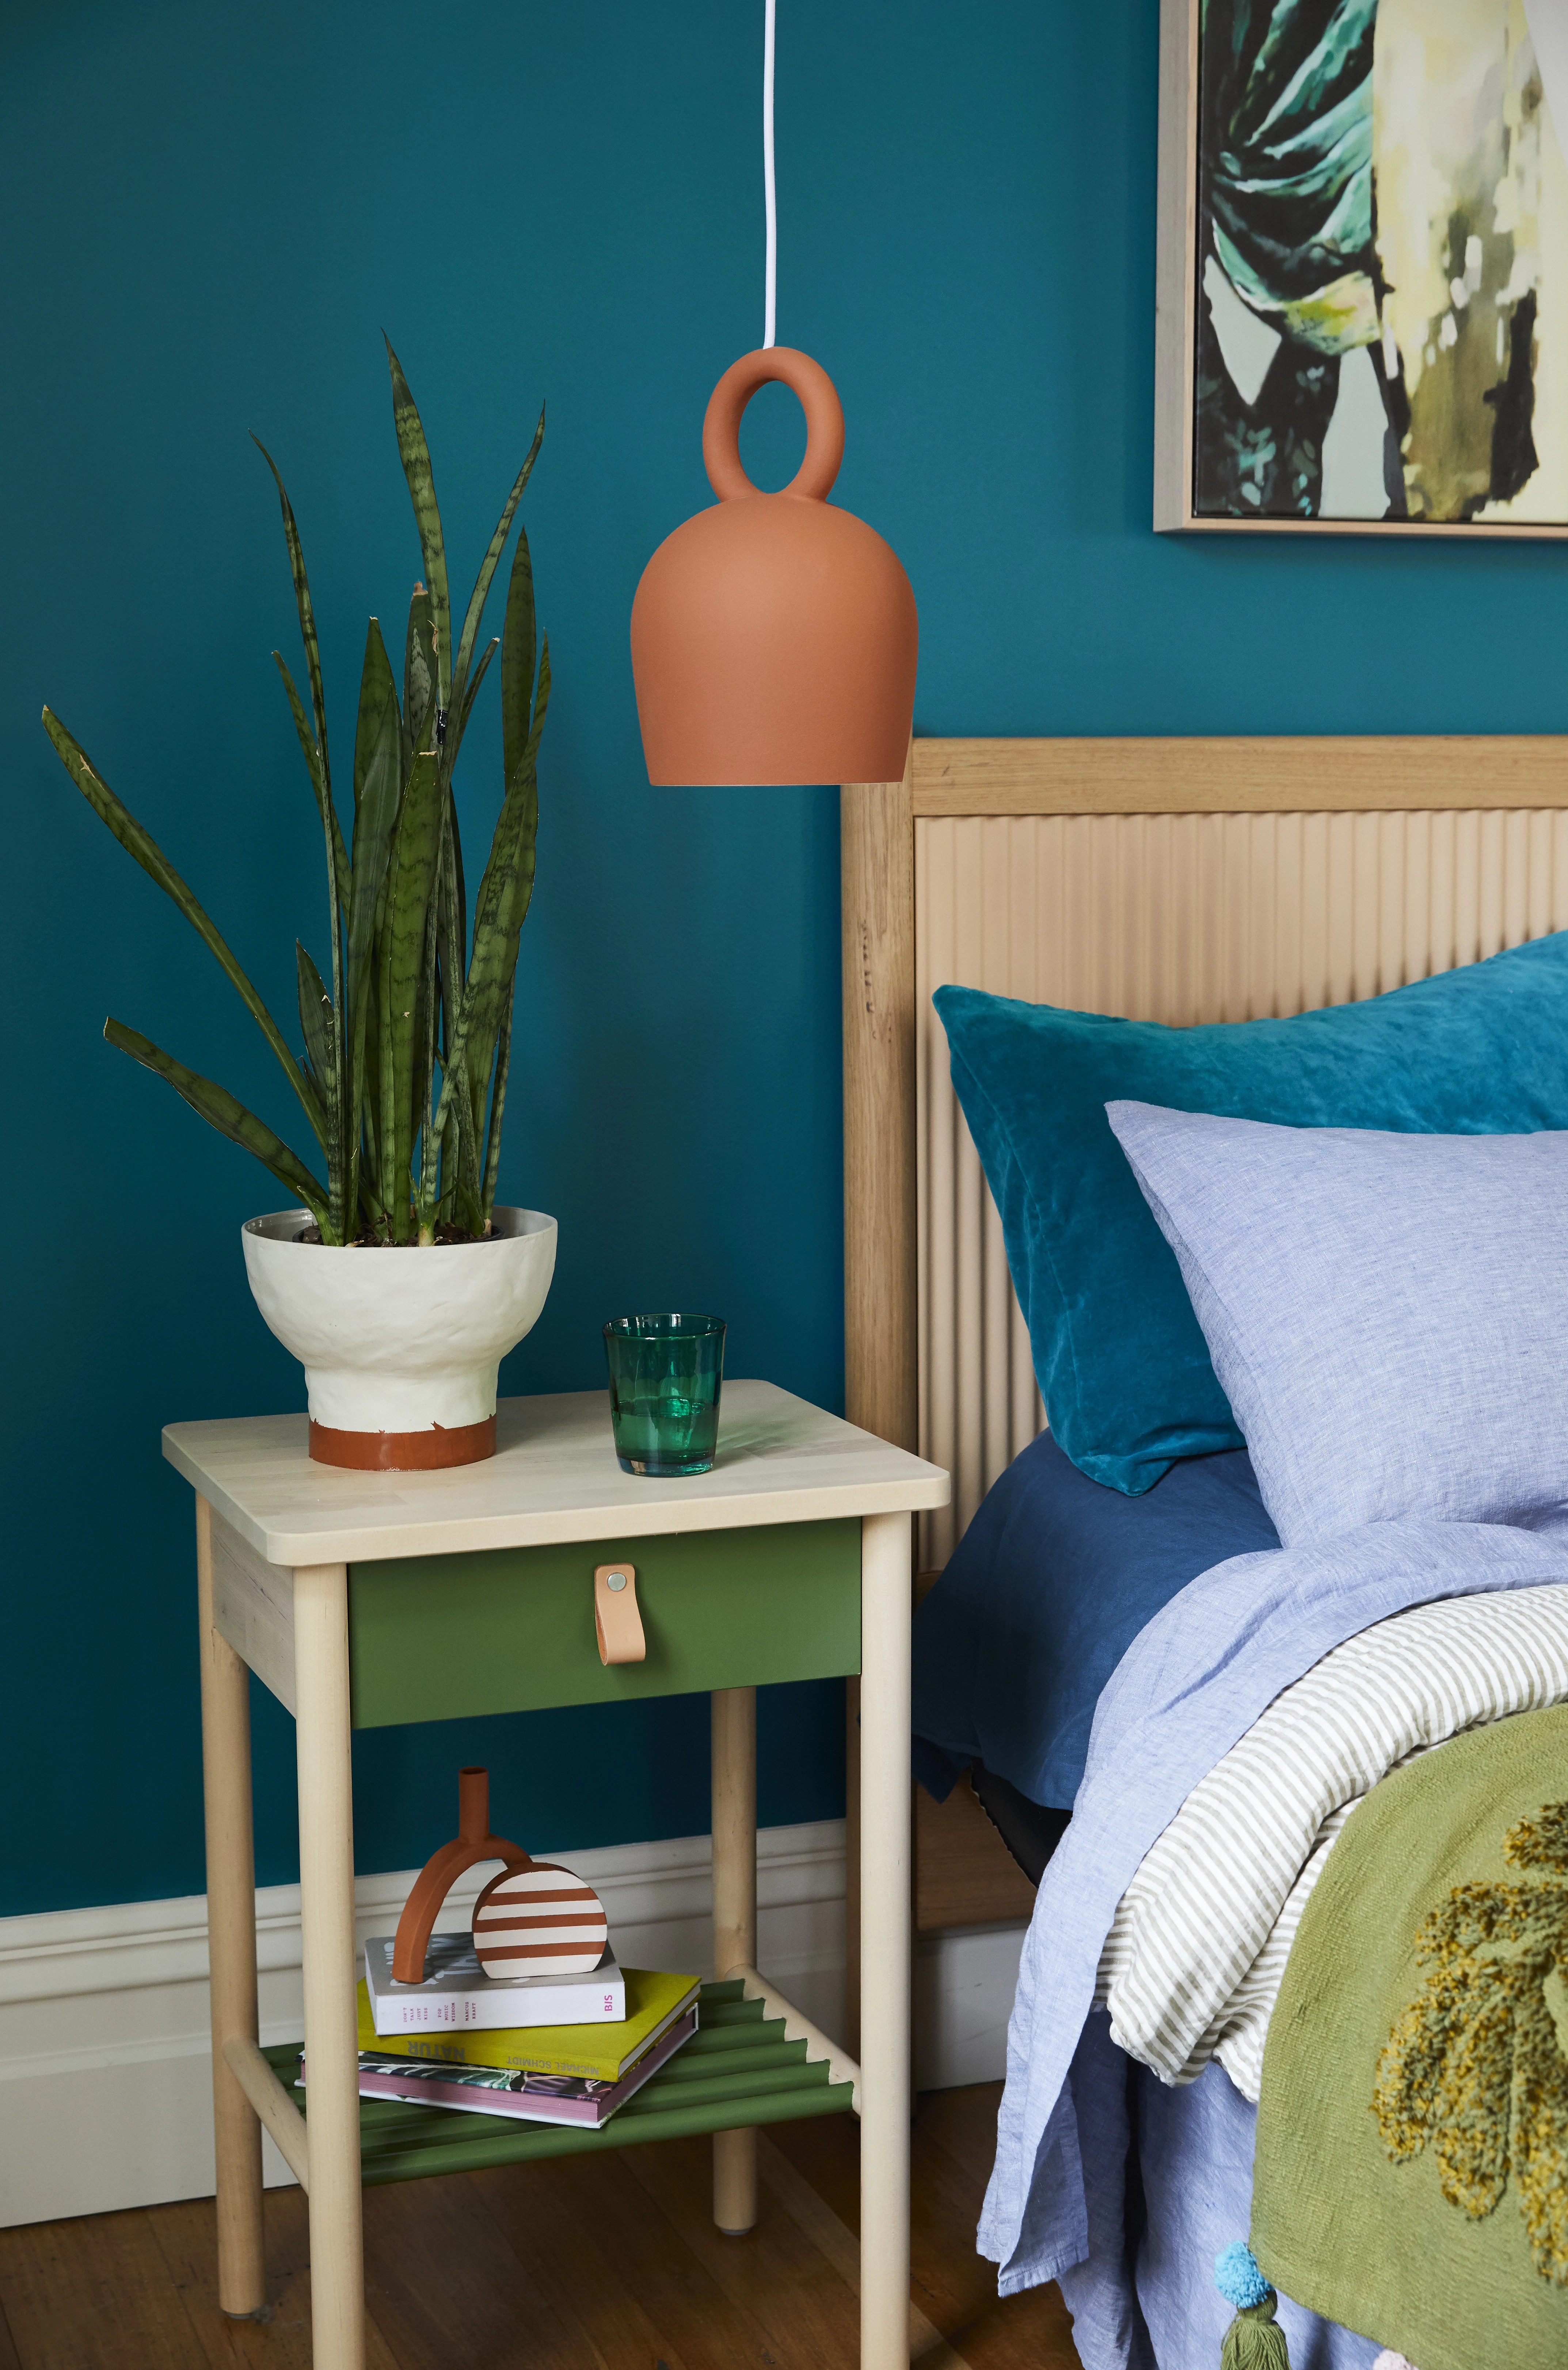 Bedroom with blue green wall and hanging pendant light